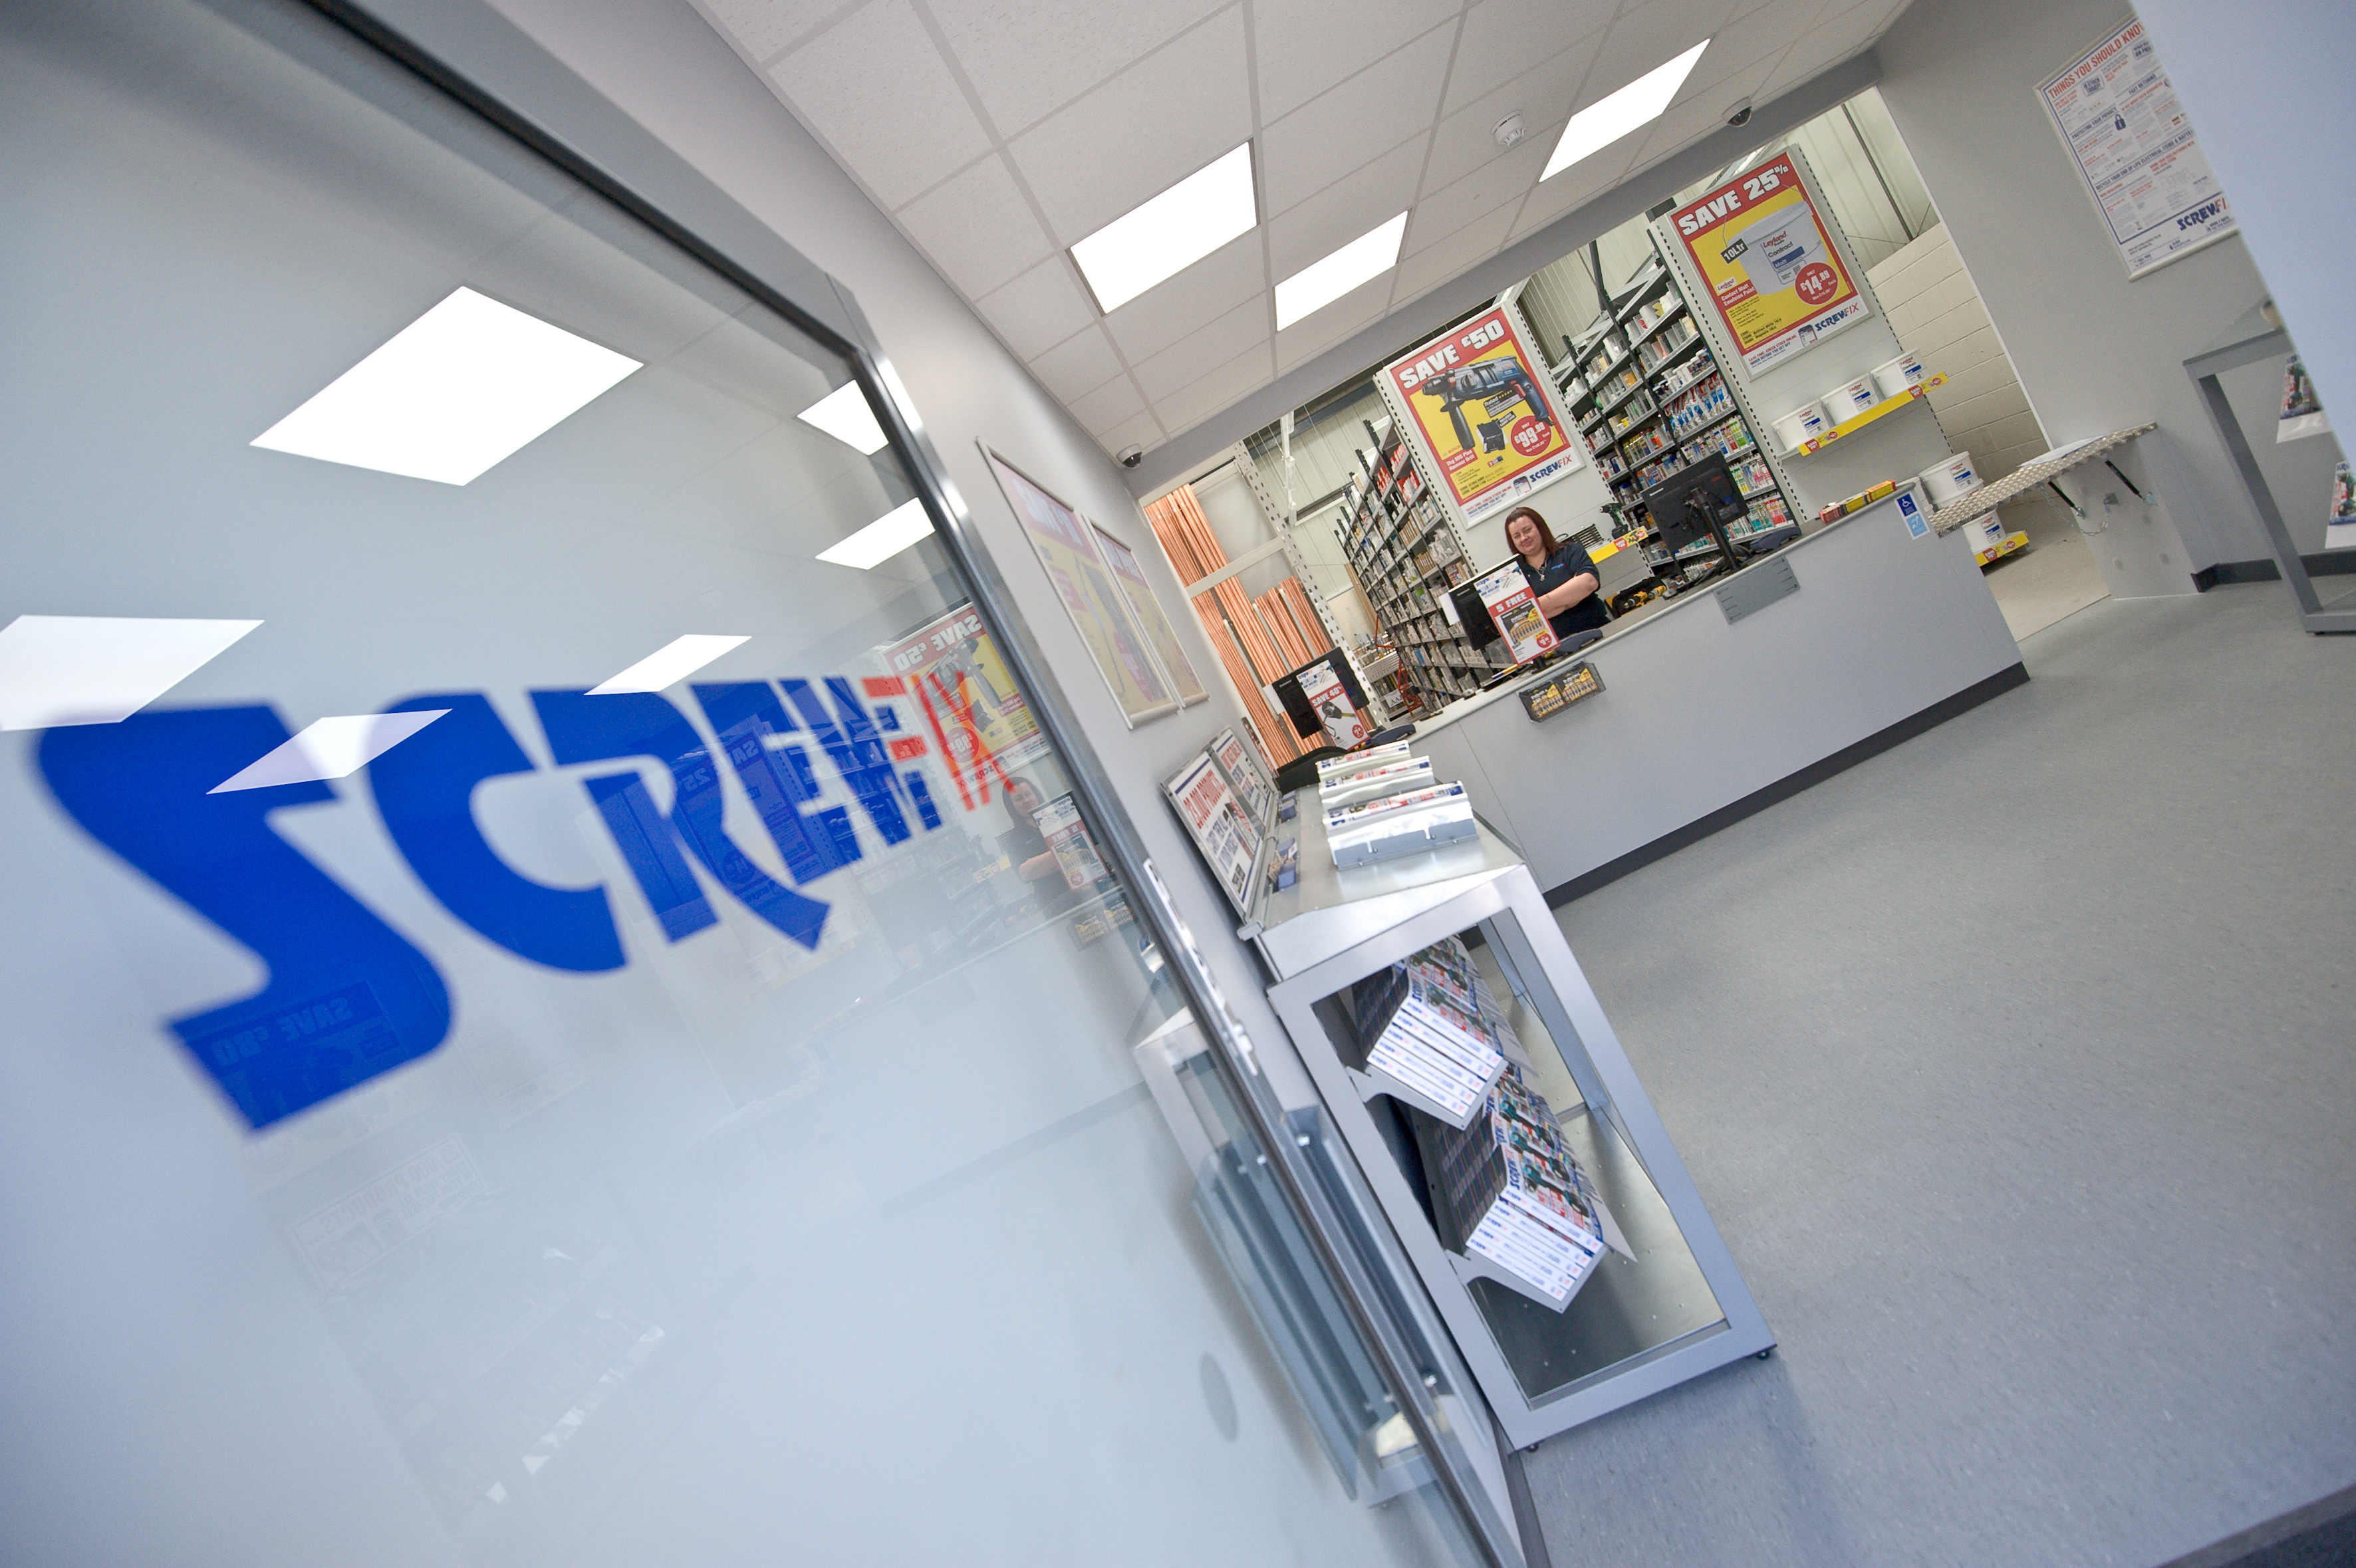 Coalville’s first Screwfix store to open on 4th June